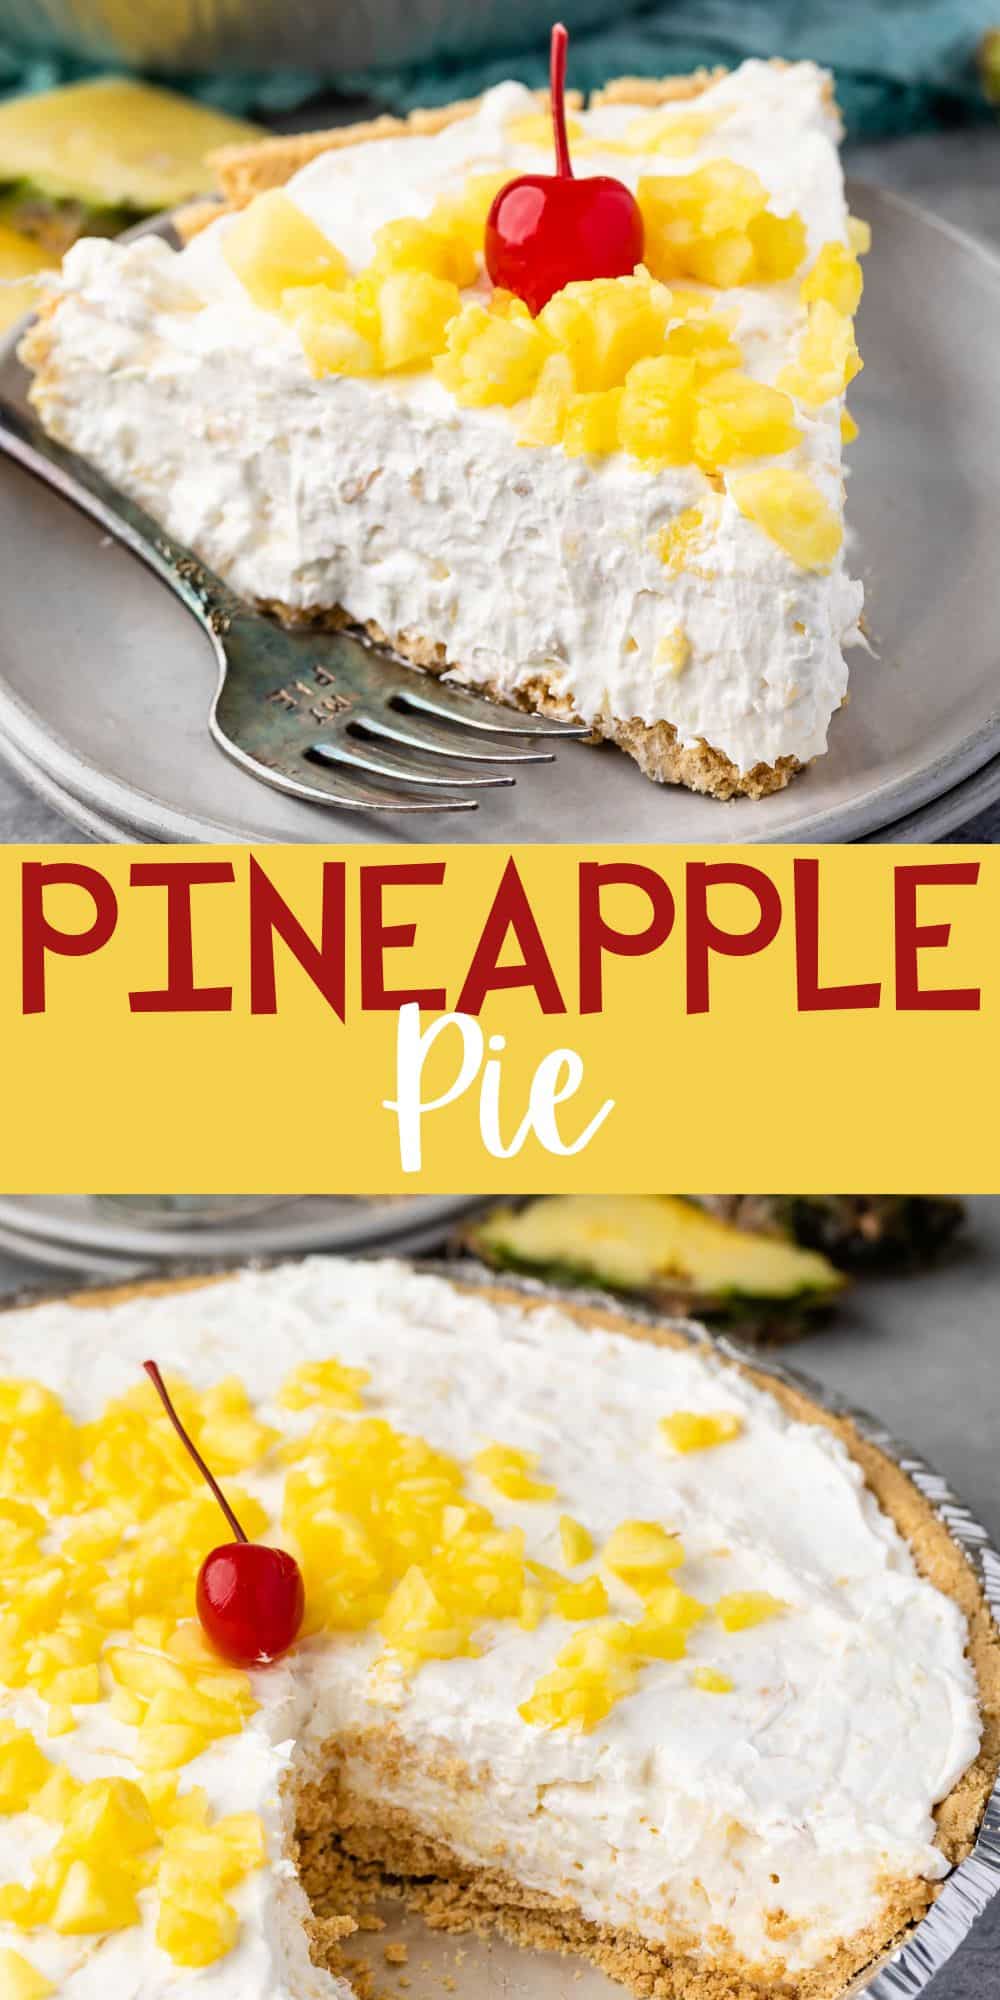 two photos of pie with a graham cracker crust and pineapple and a cherry on top with words on the image.